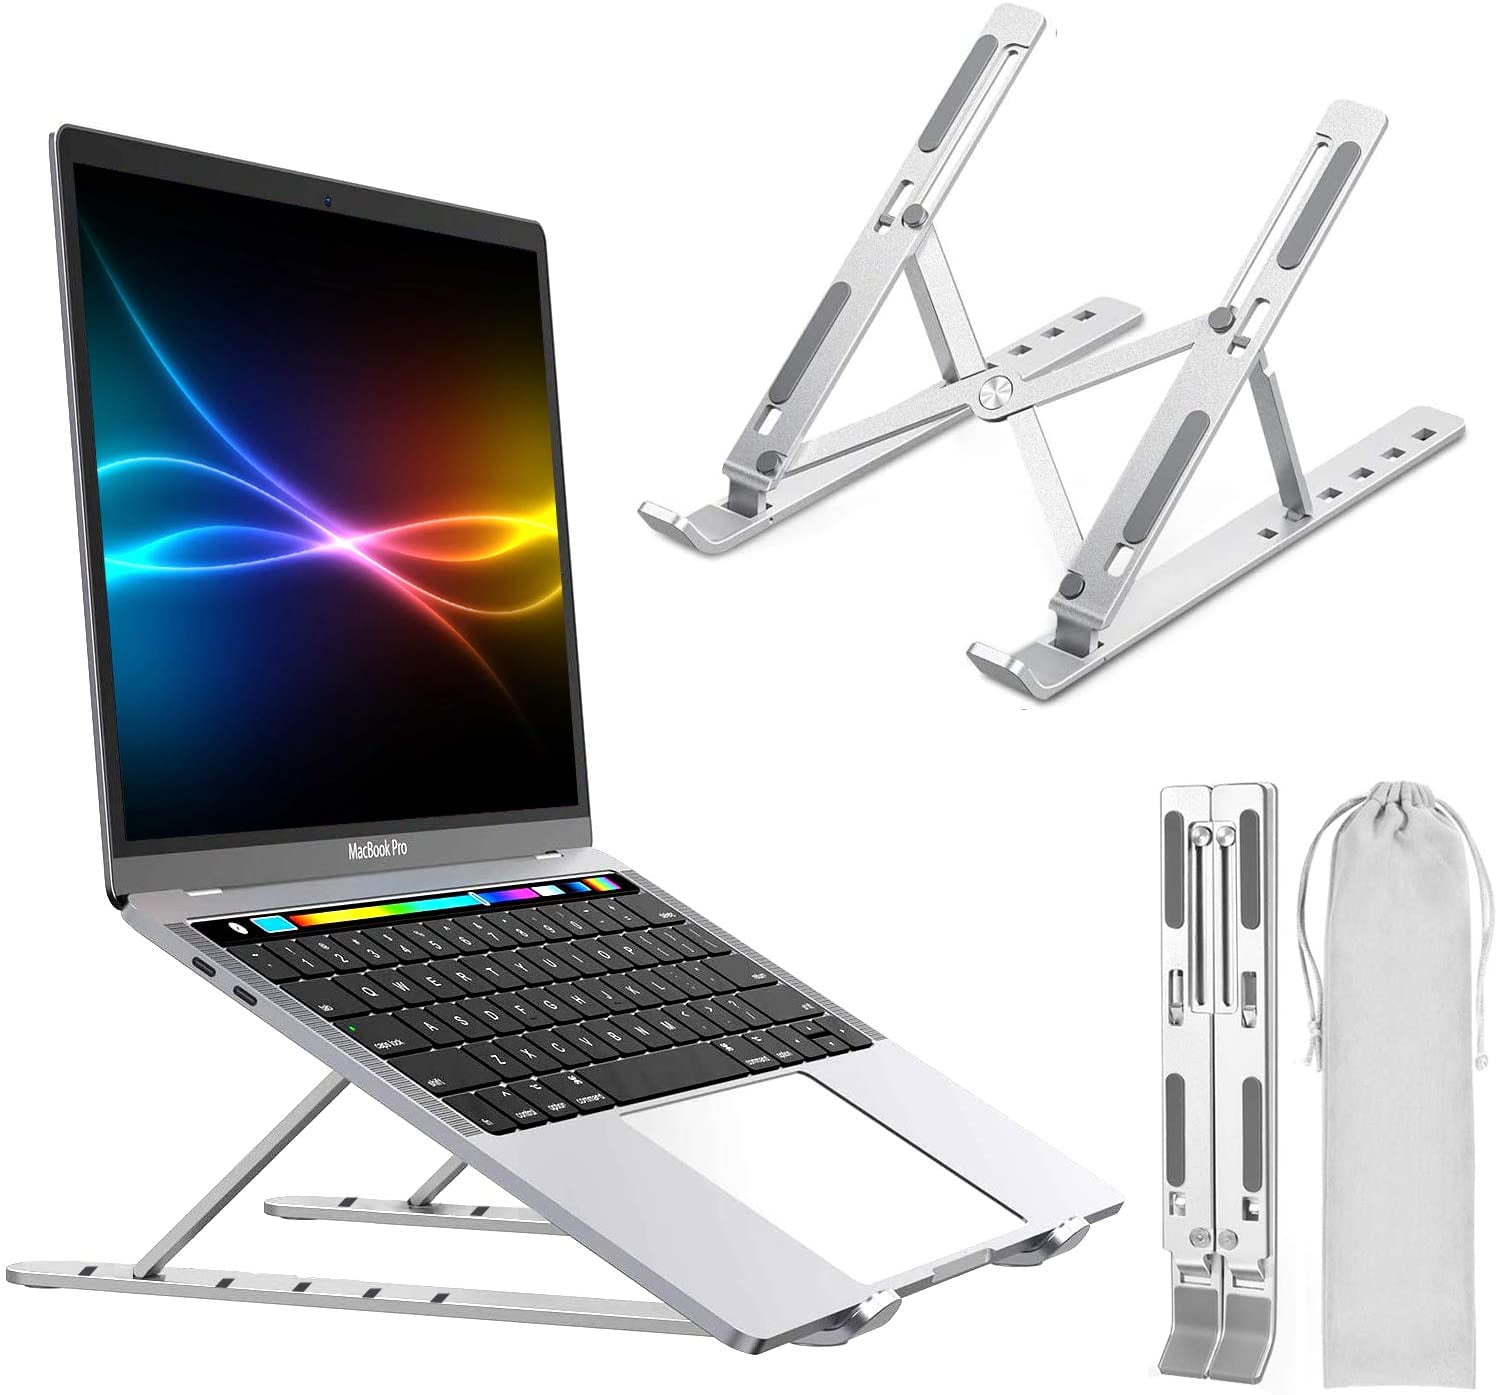 Ergonomic Aluminum Computer Stand PHOCAR Portable Laptop Stand for Desk Adjustable Laptop Holder Riser Compatible with MacBook Air Pro 13 16 iPad Air Pro Dell HP Acer Xiaomi Surface Chrome 